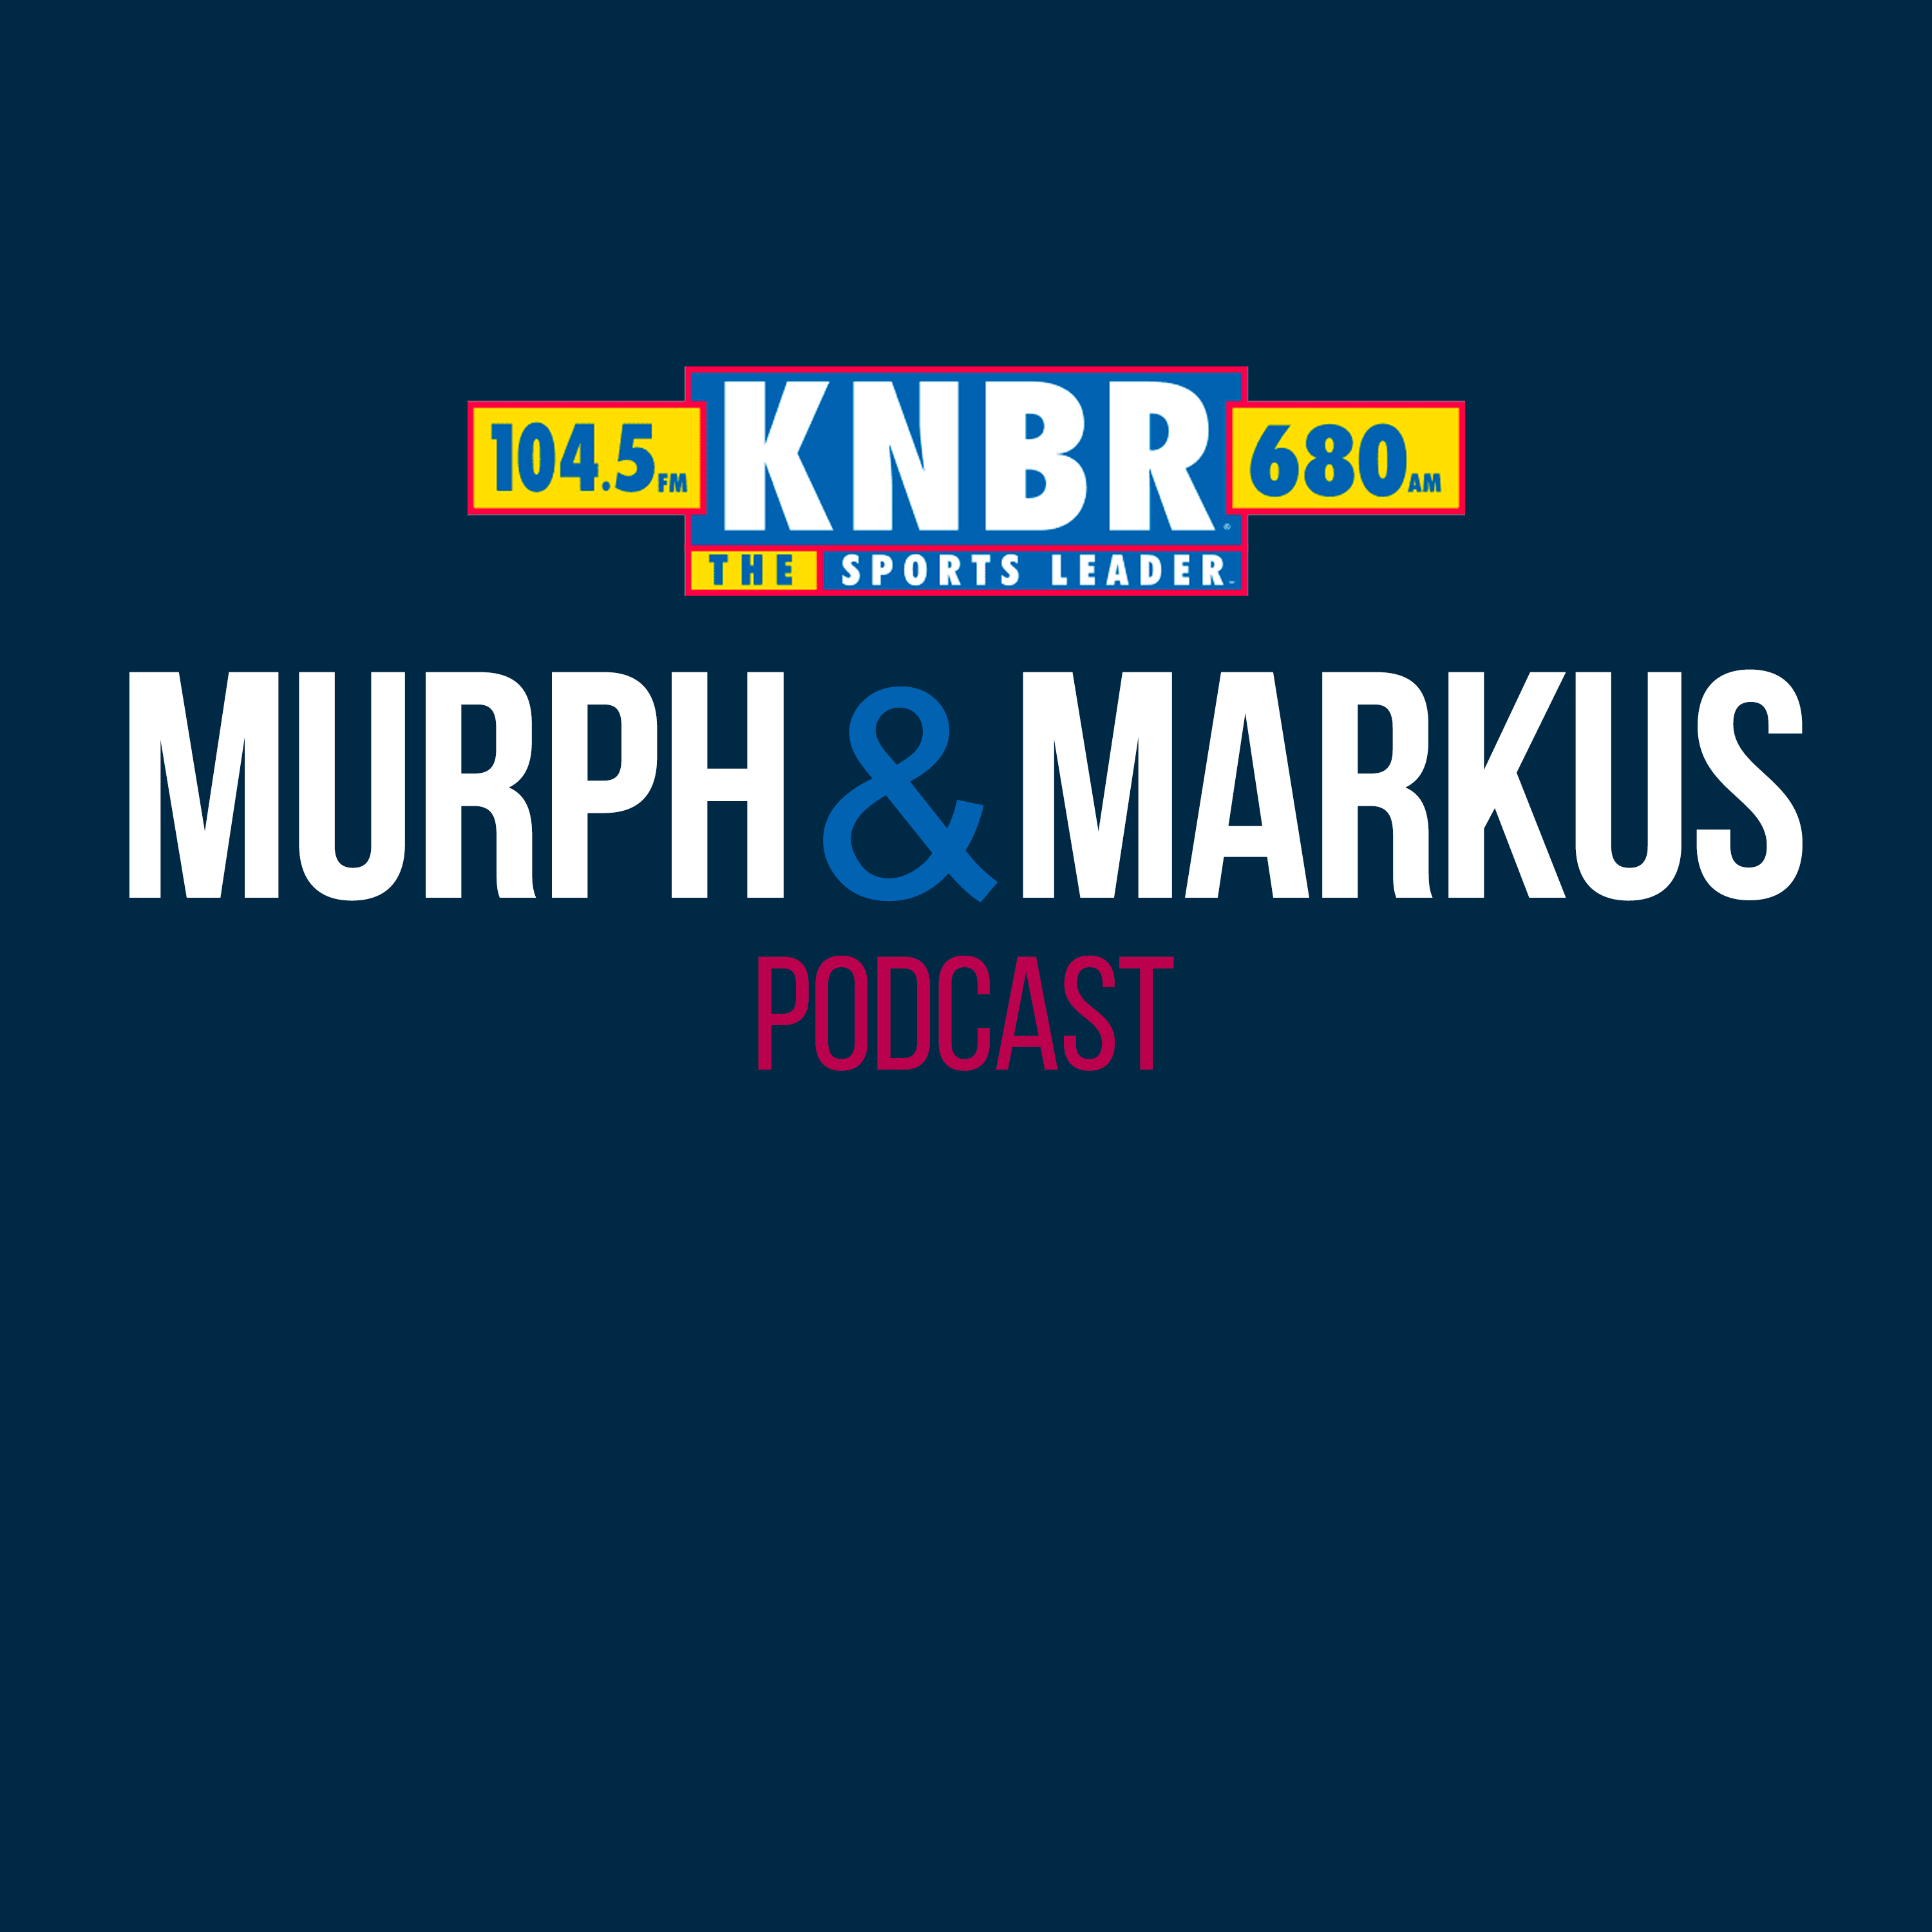 4-19 Bob Brenly joins Murph and Markus to discuss Mike Krukow as a teammate, why Patrick Bailey stands out as one of the best catchers in baseball and why Bob Melvin is a great manager